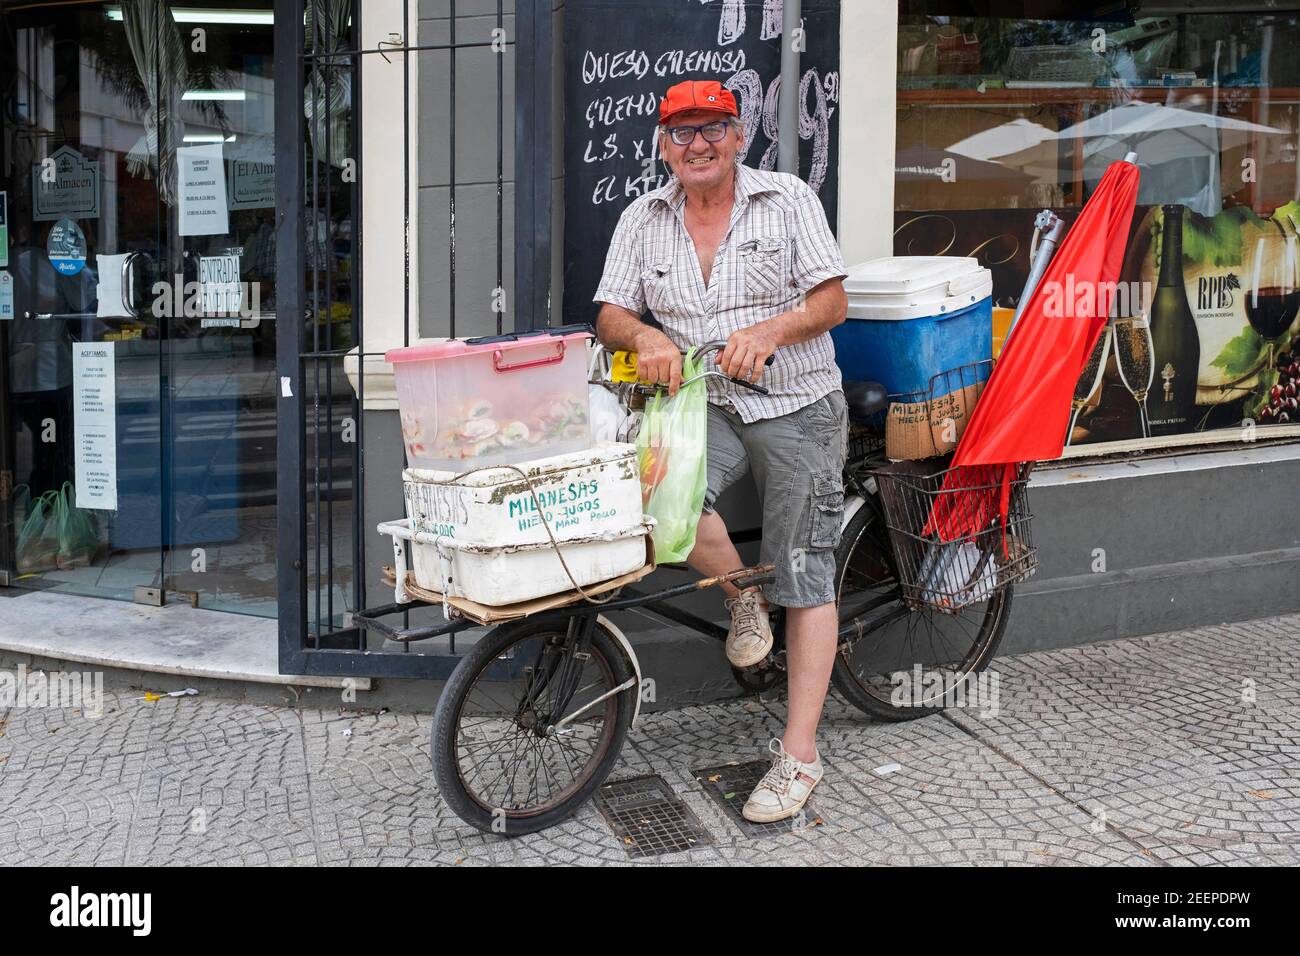 Argentinean street vendor selling sandwiches from his bicycle in the city Corrientes, Corrientes Province, Argentina Stock Photo